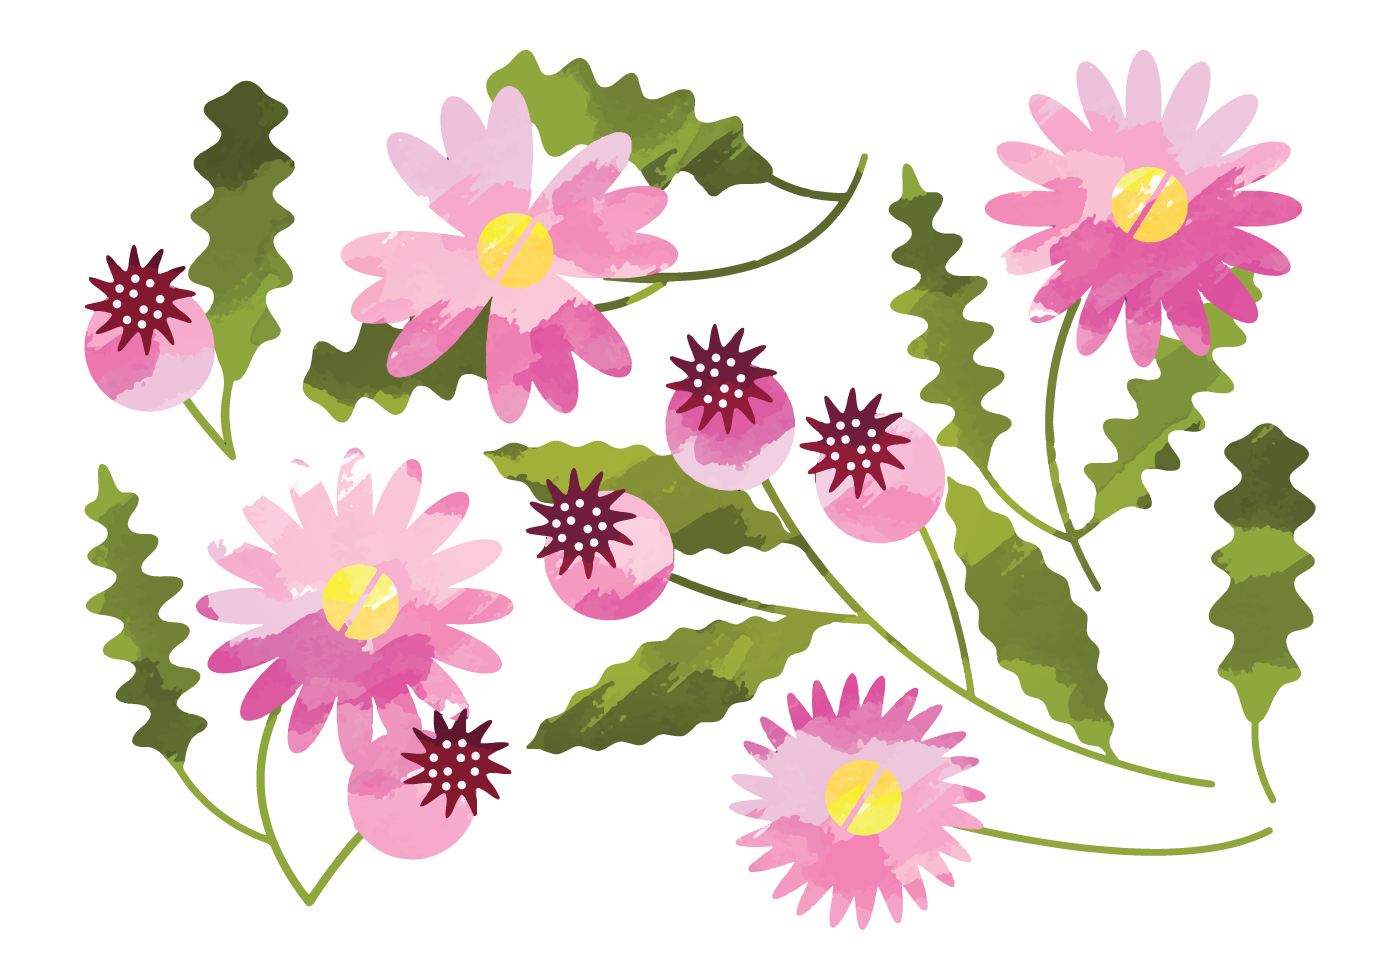 Download Vector Watercolor Daisy Flower Elements - Download Free ...